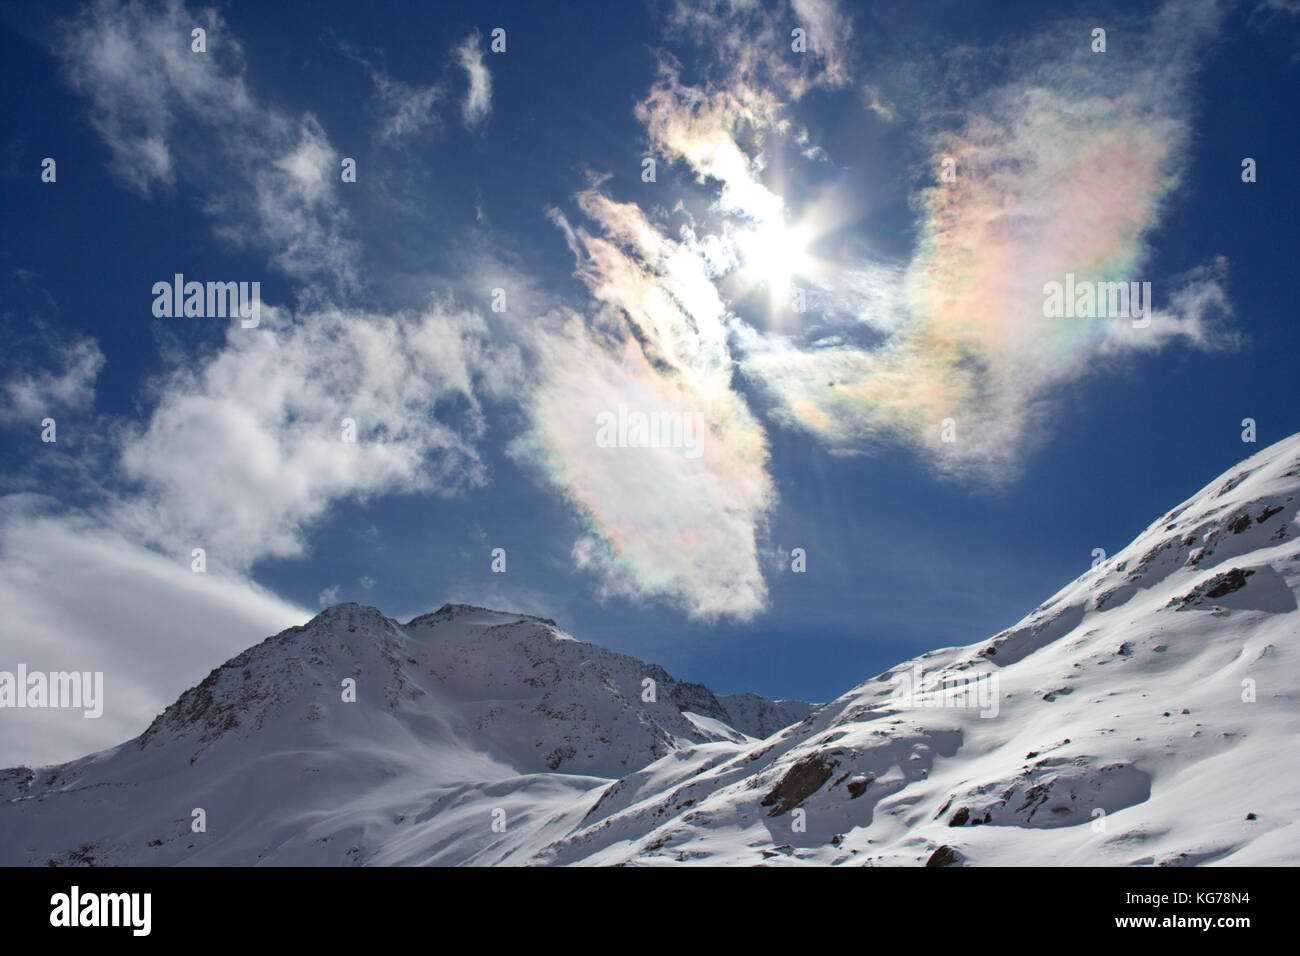 Winter landscape in Austria with colorful cirrus clouds around the sun. Stock Photo